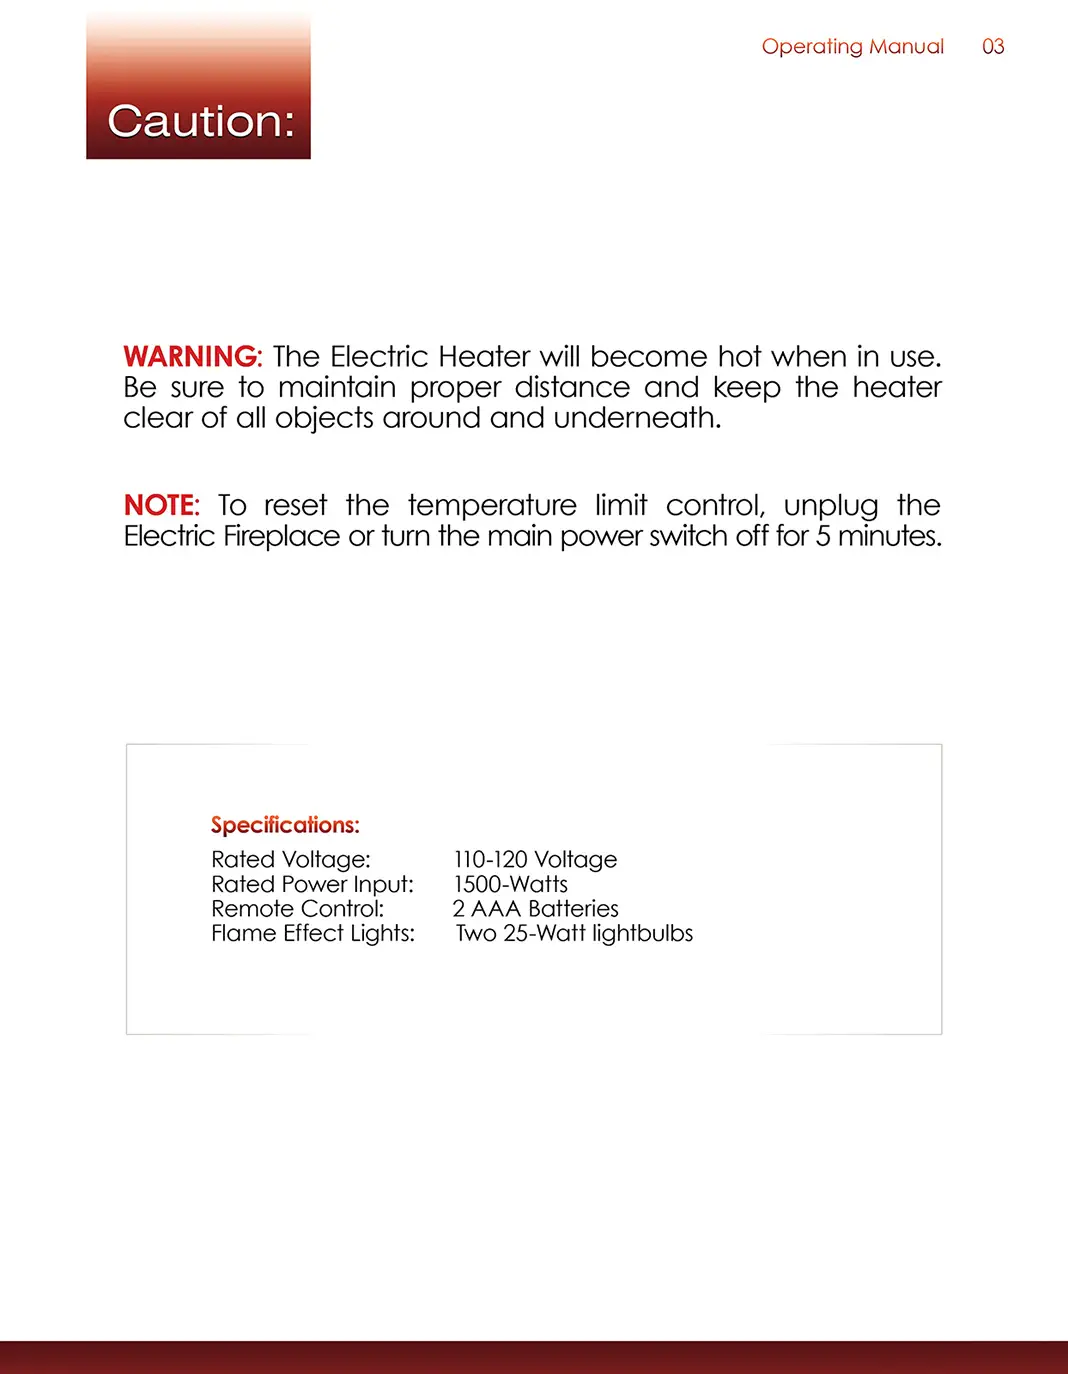 Burkfield Astor HM-245 Operating Manual: Page #3: Warning and Note